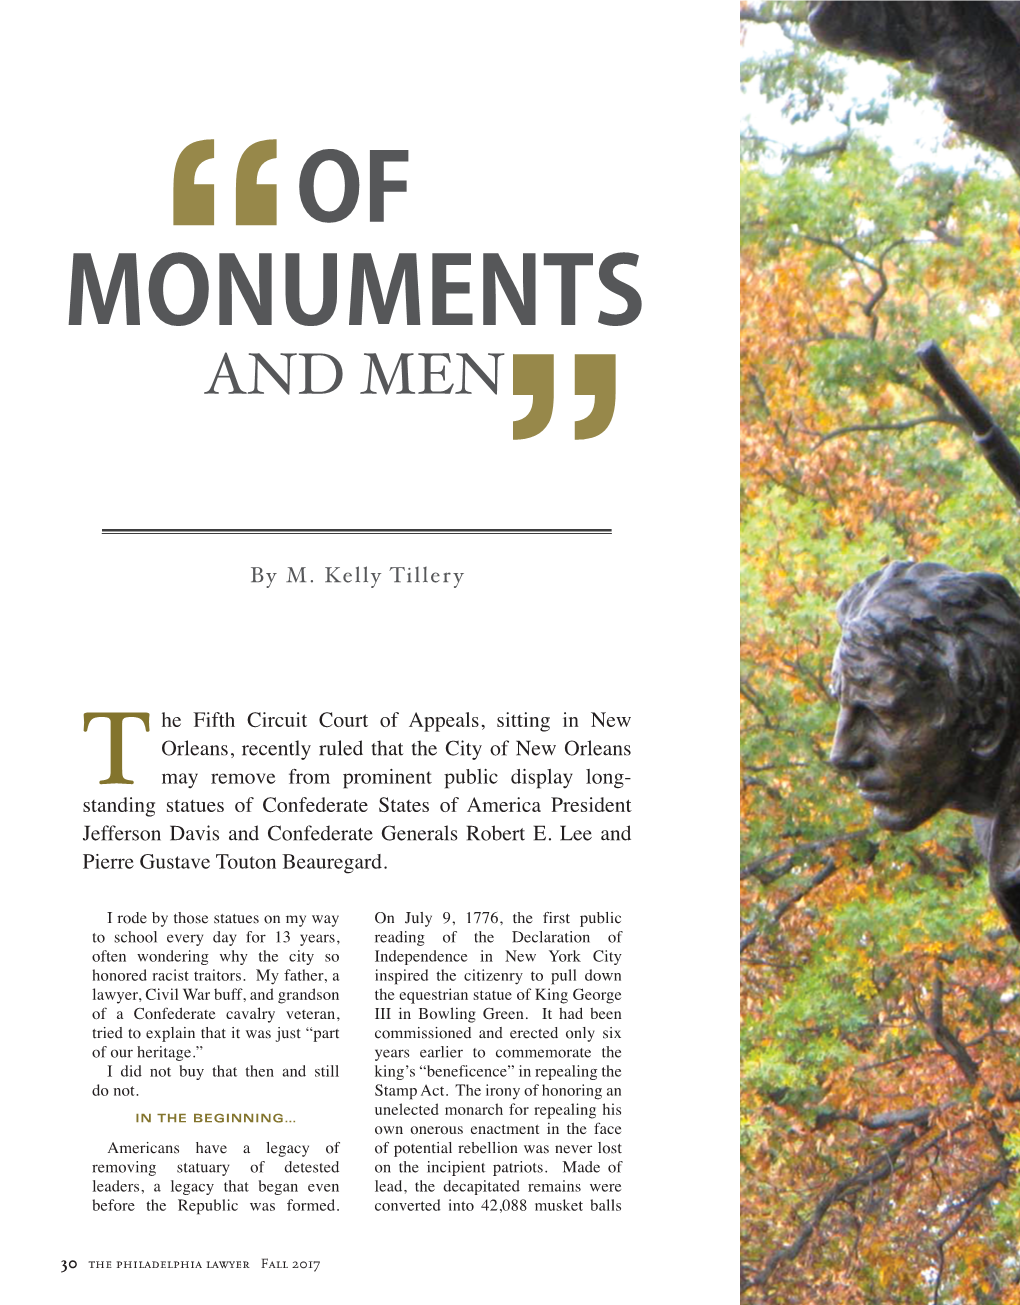 OF MONUMENTS“ and MEN” by M